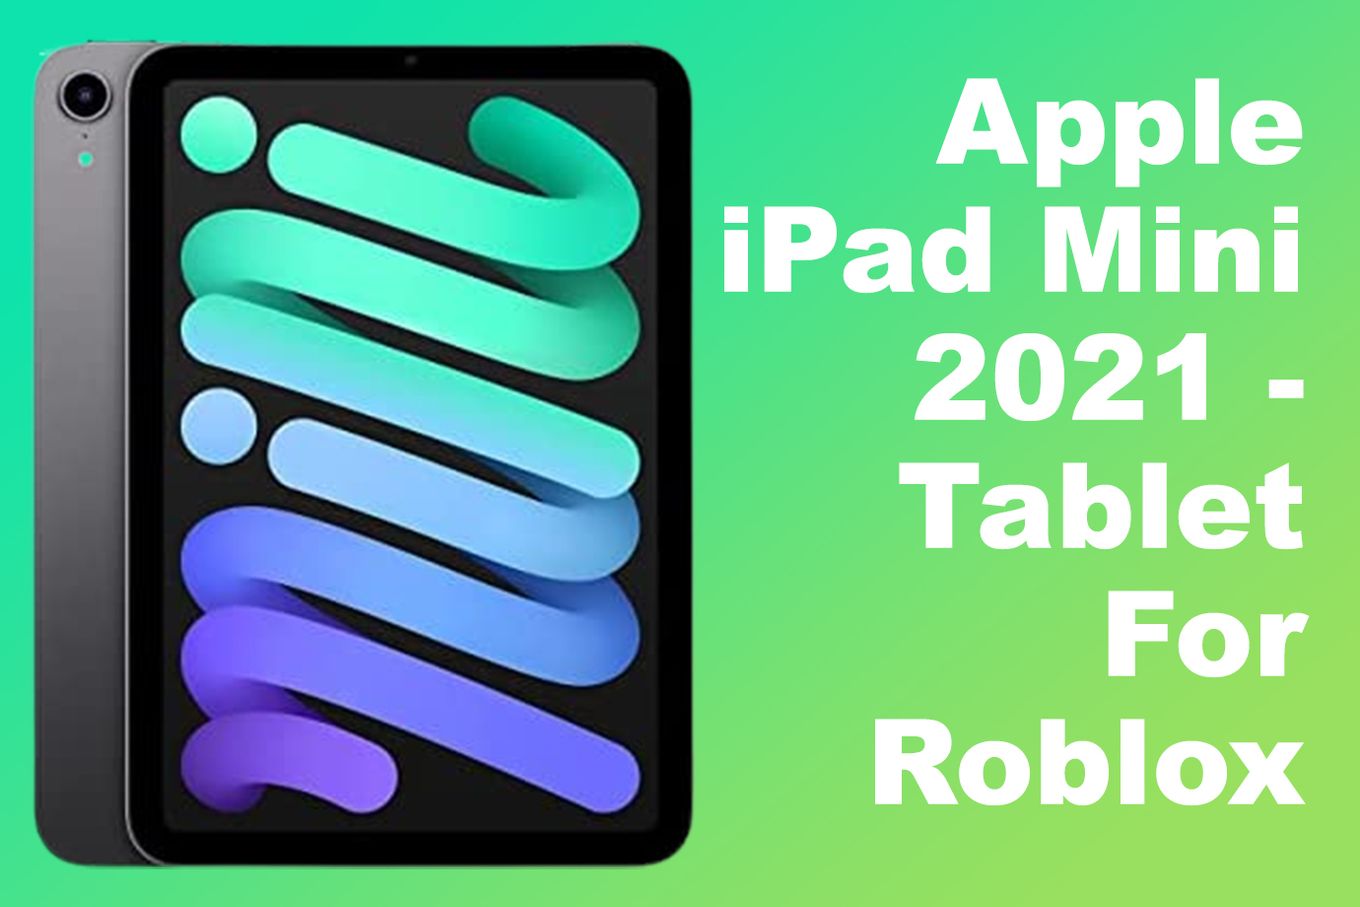 iPad Mini 2021 - Tablet For Playing Roblox